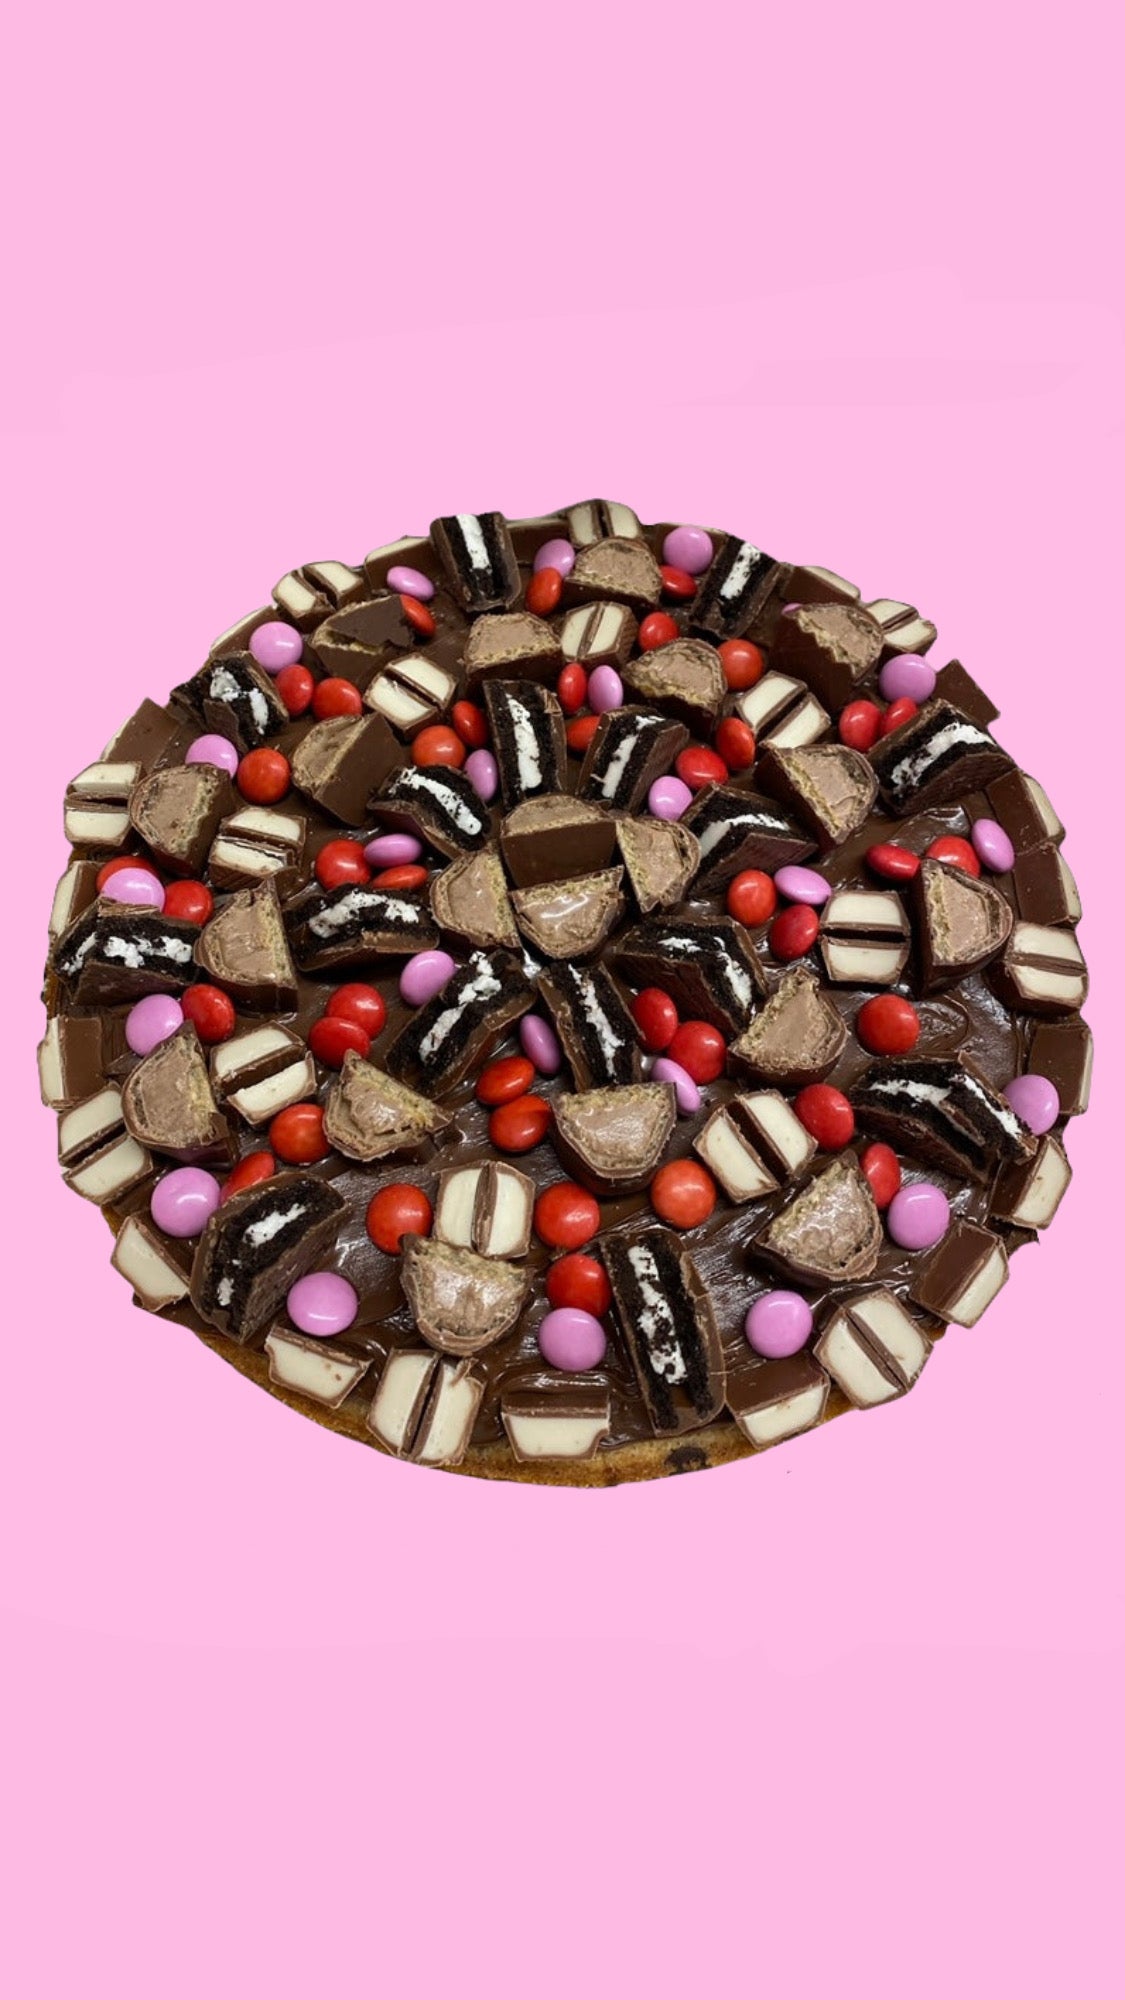 COOKIE PIZZA